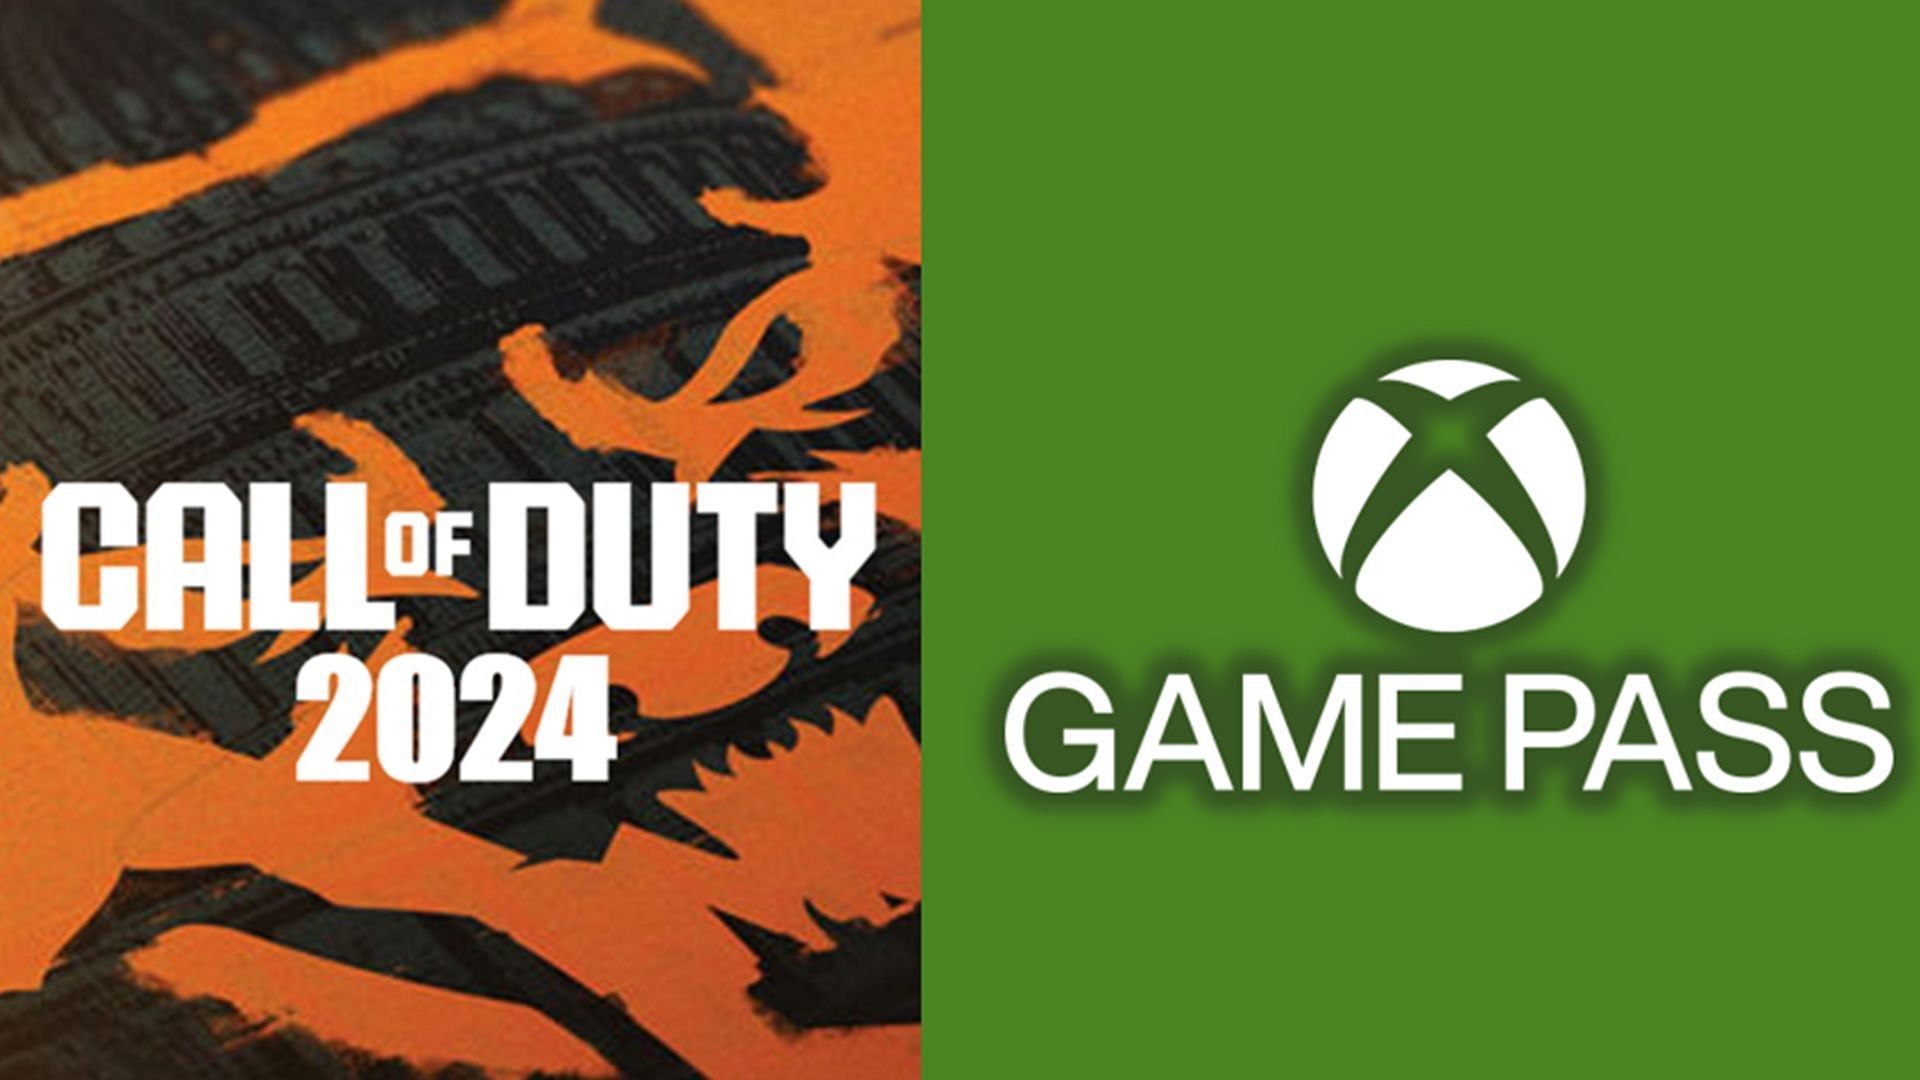 CoD 2024 Black Ops 6 from Treyarch and Activision is rumored to affect Xbox Game Pass subscription plans upon its release